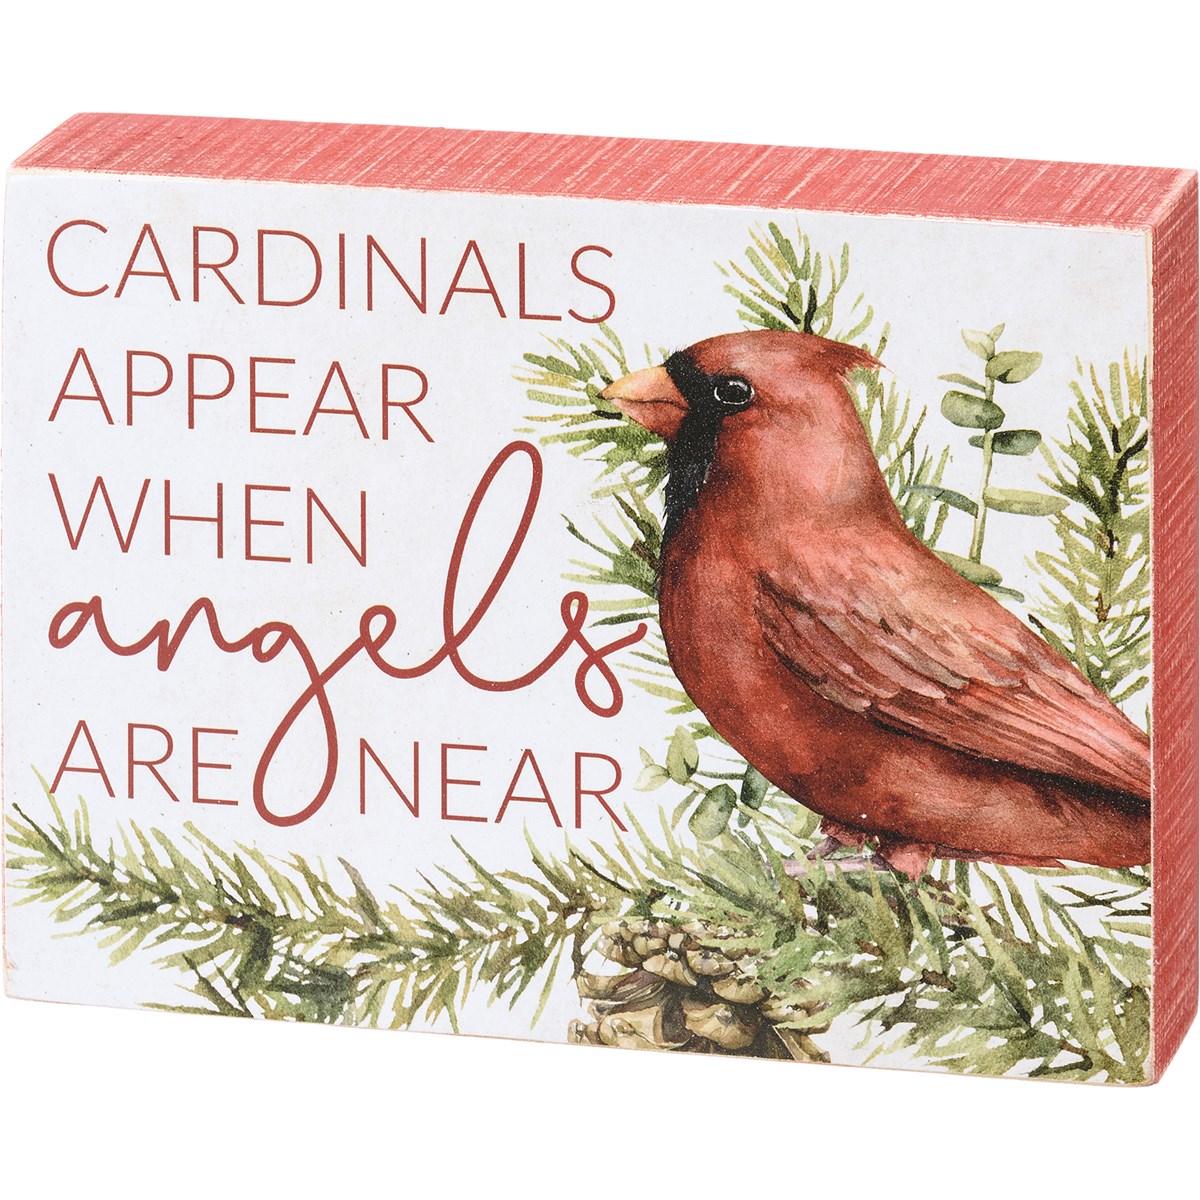 Cardinals Appear When Angels Are Near Box Sign - Wood, Paper